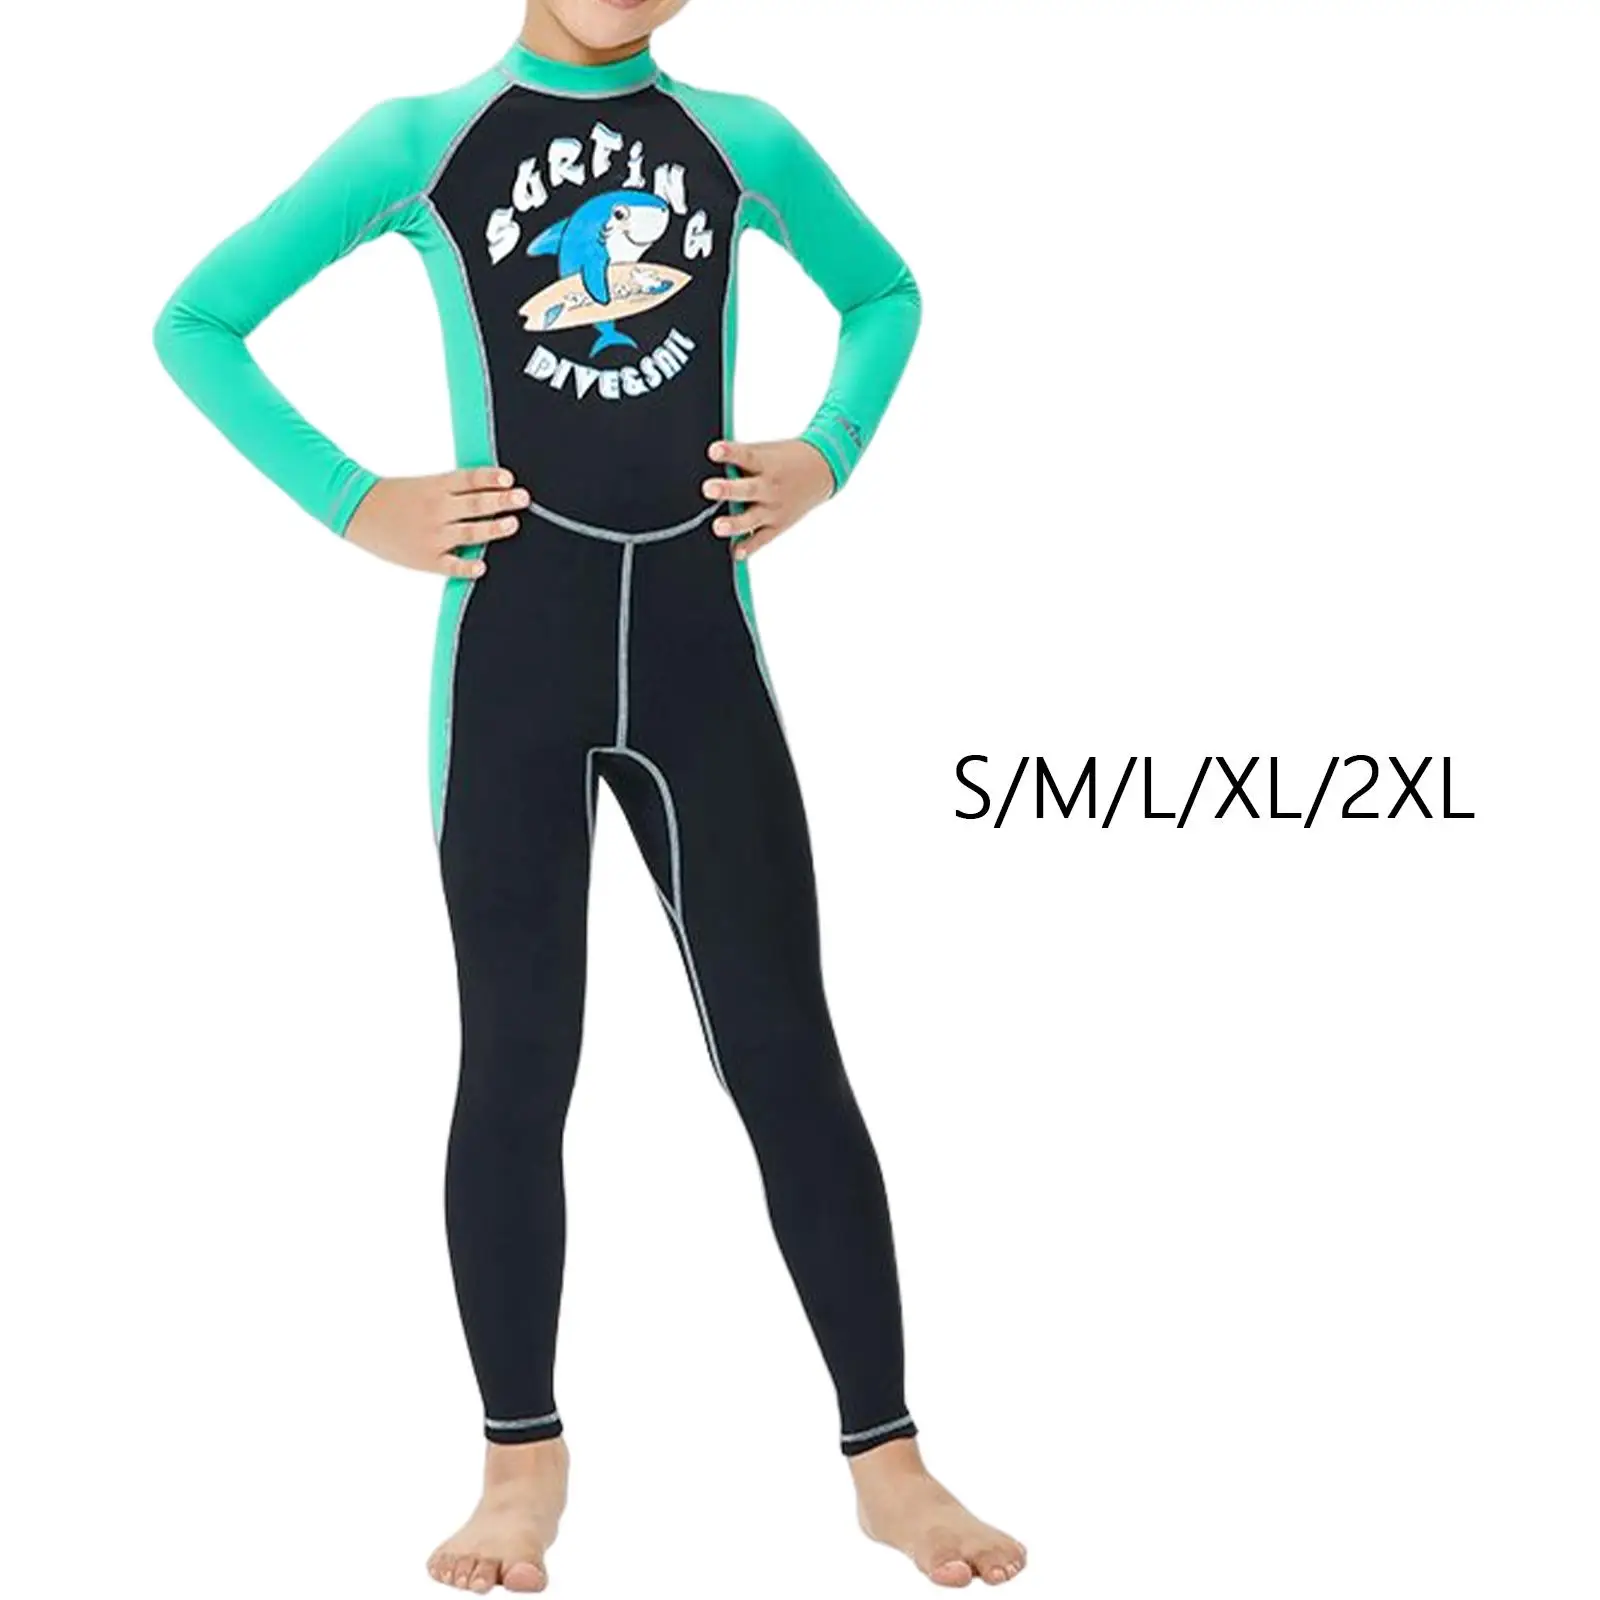 Kids Wetsuit Swimsuit Scuba Diving Suit Long Sleeve Full Body One Piece Wet Suit for Swimming Surfing Diving Boys Girls